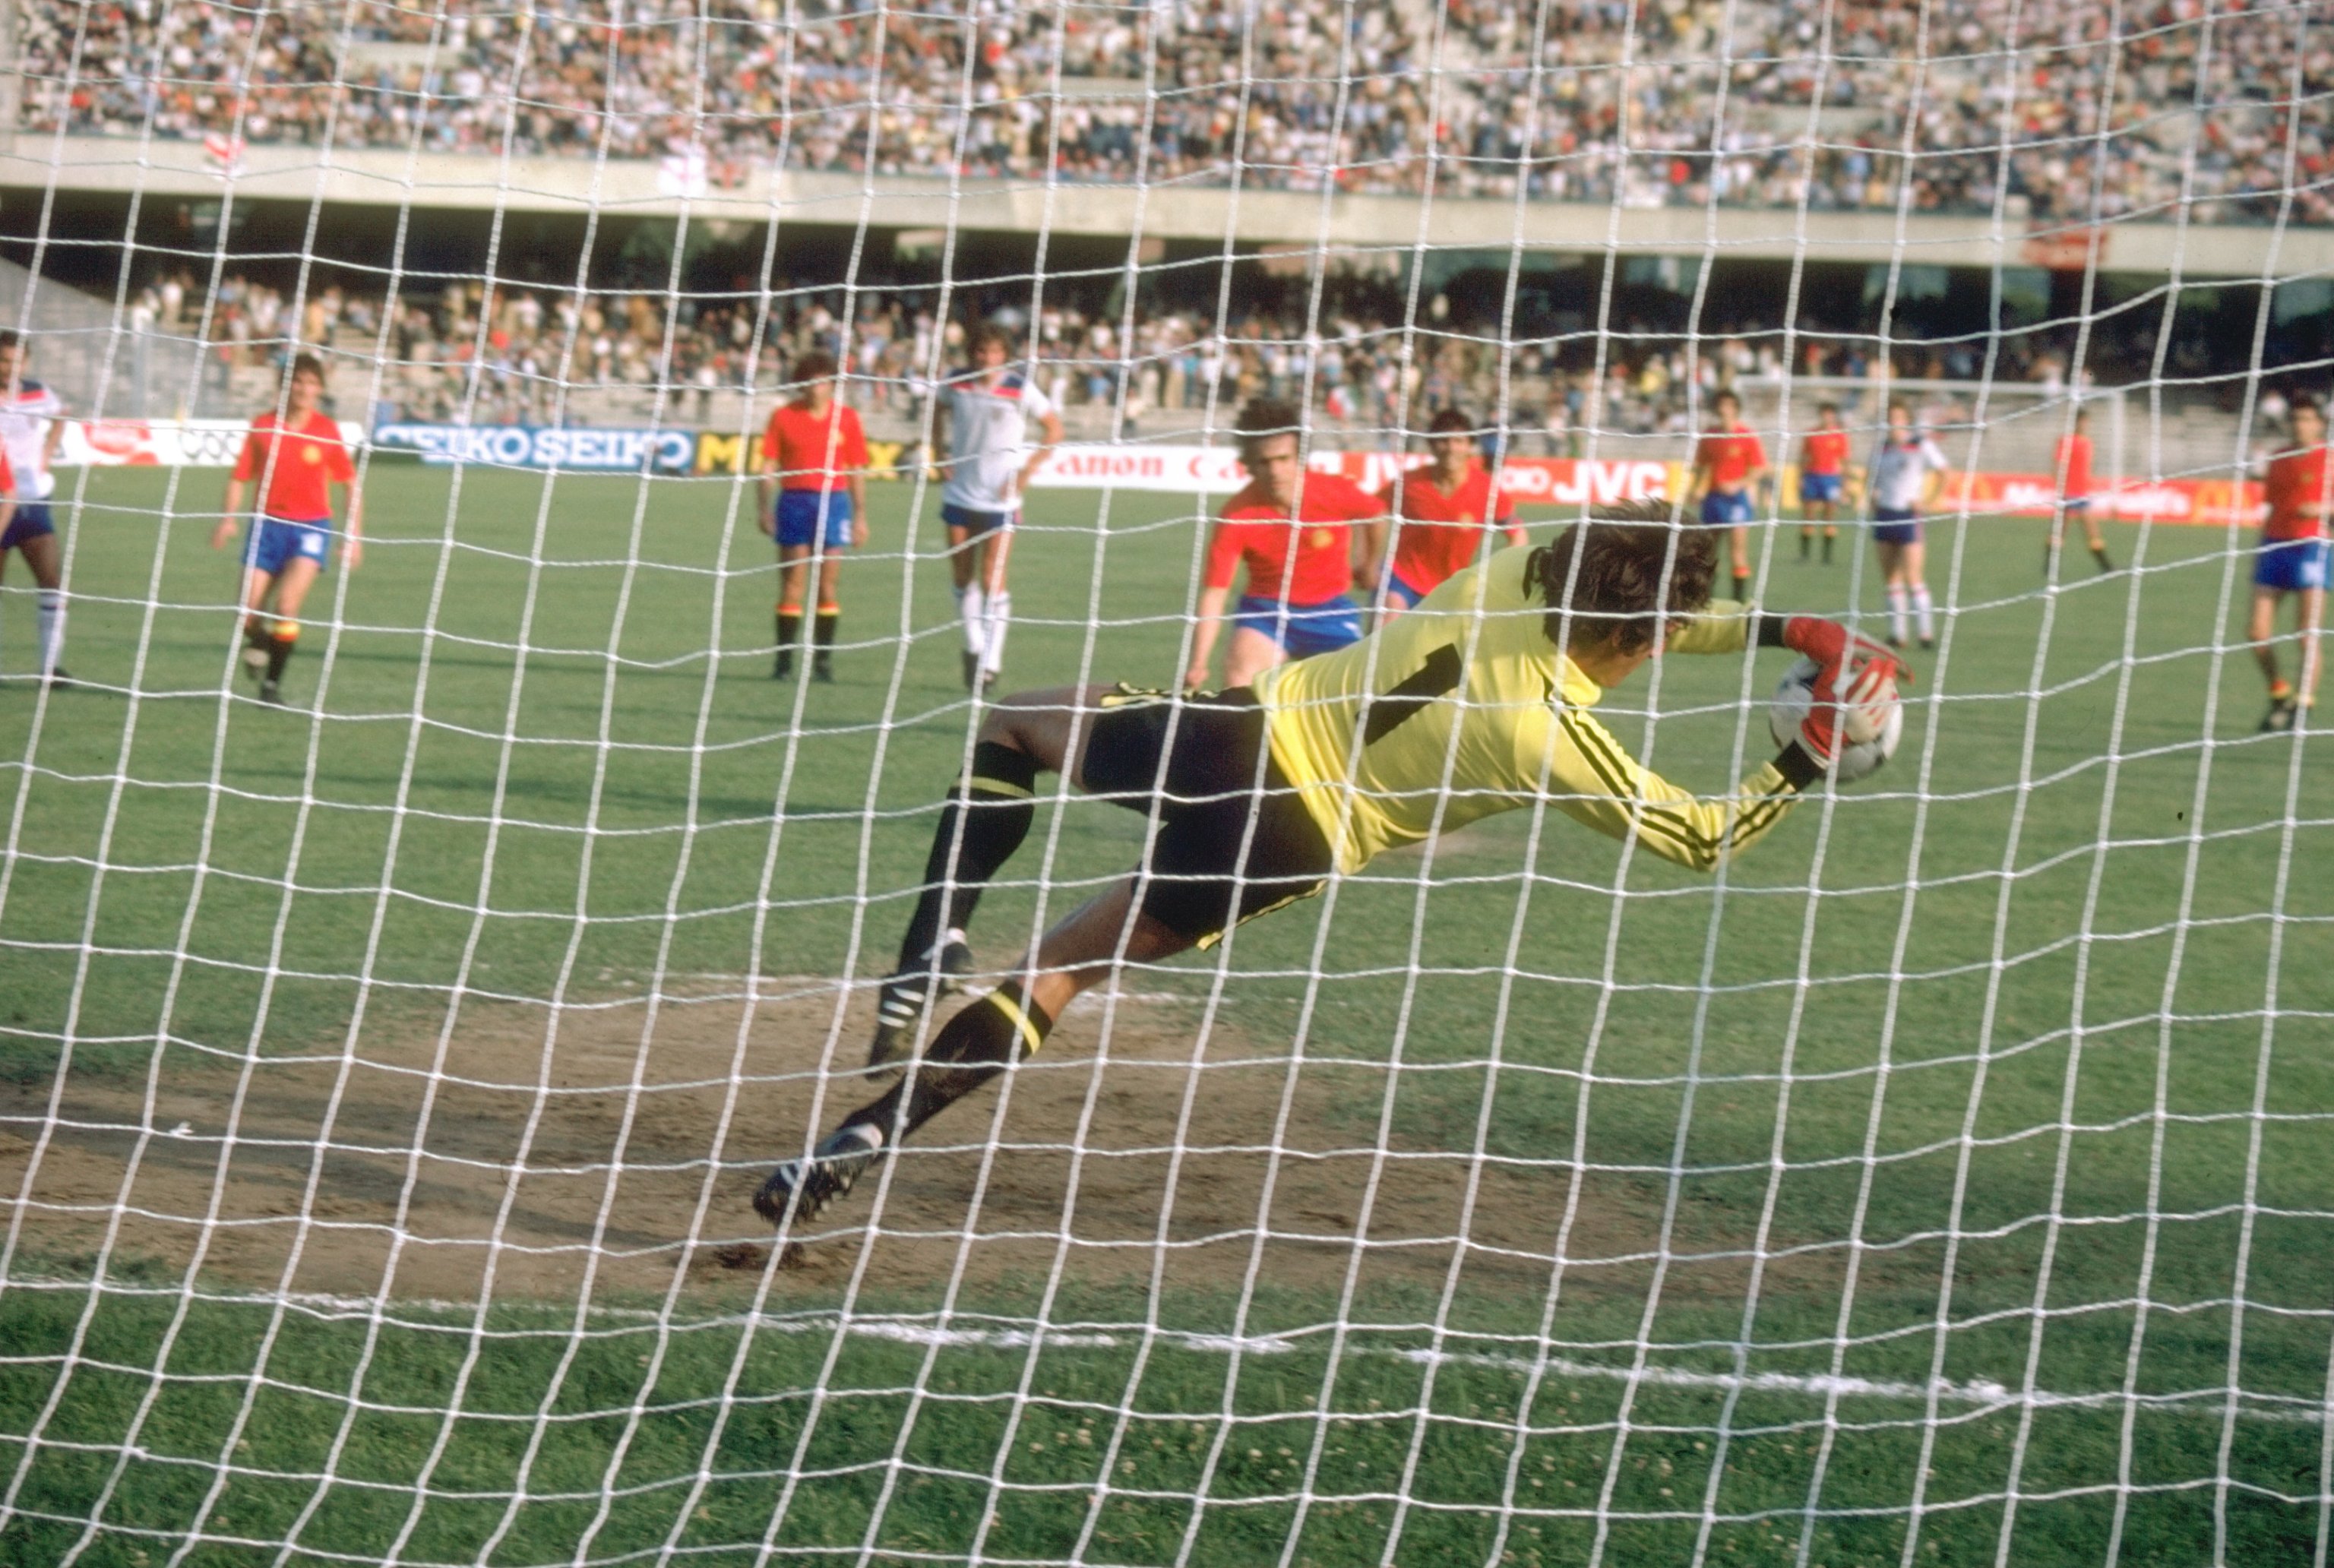 18 Jun 1980:  England Goalkeeper Ray Clemence saves a penalty during the European Championship match against Spain in Naples, Italy. England won the match 2-1.  \ Mandatory Credit: Steve  Powell/Allsport